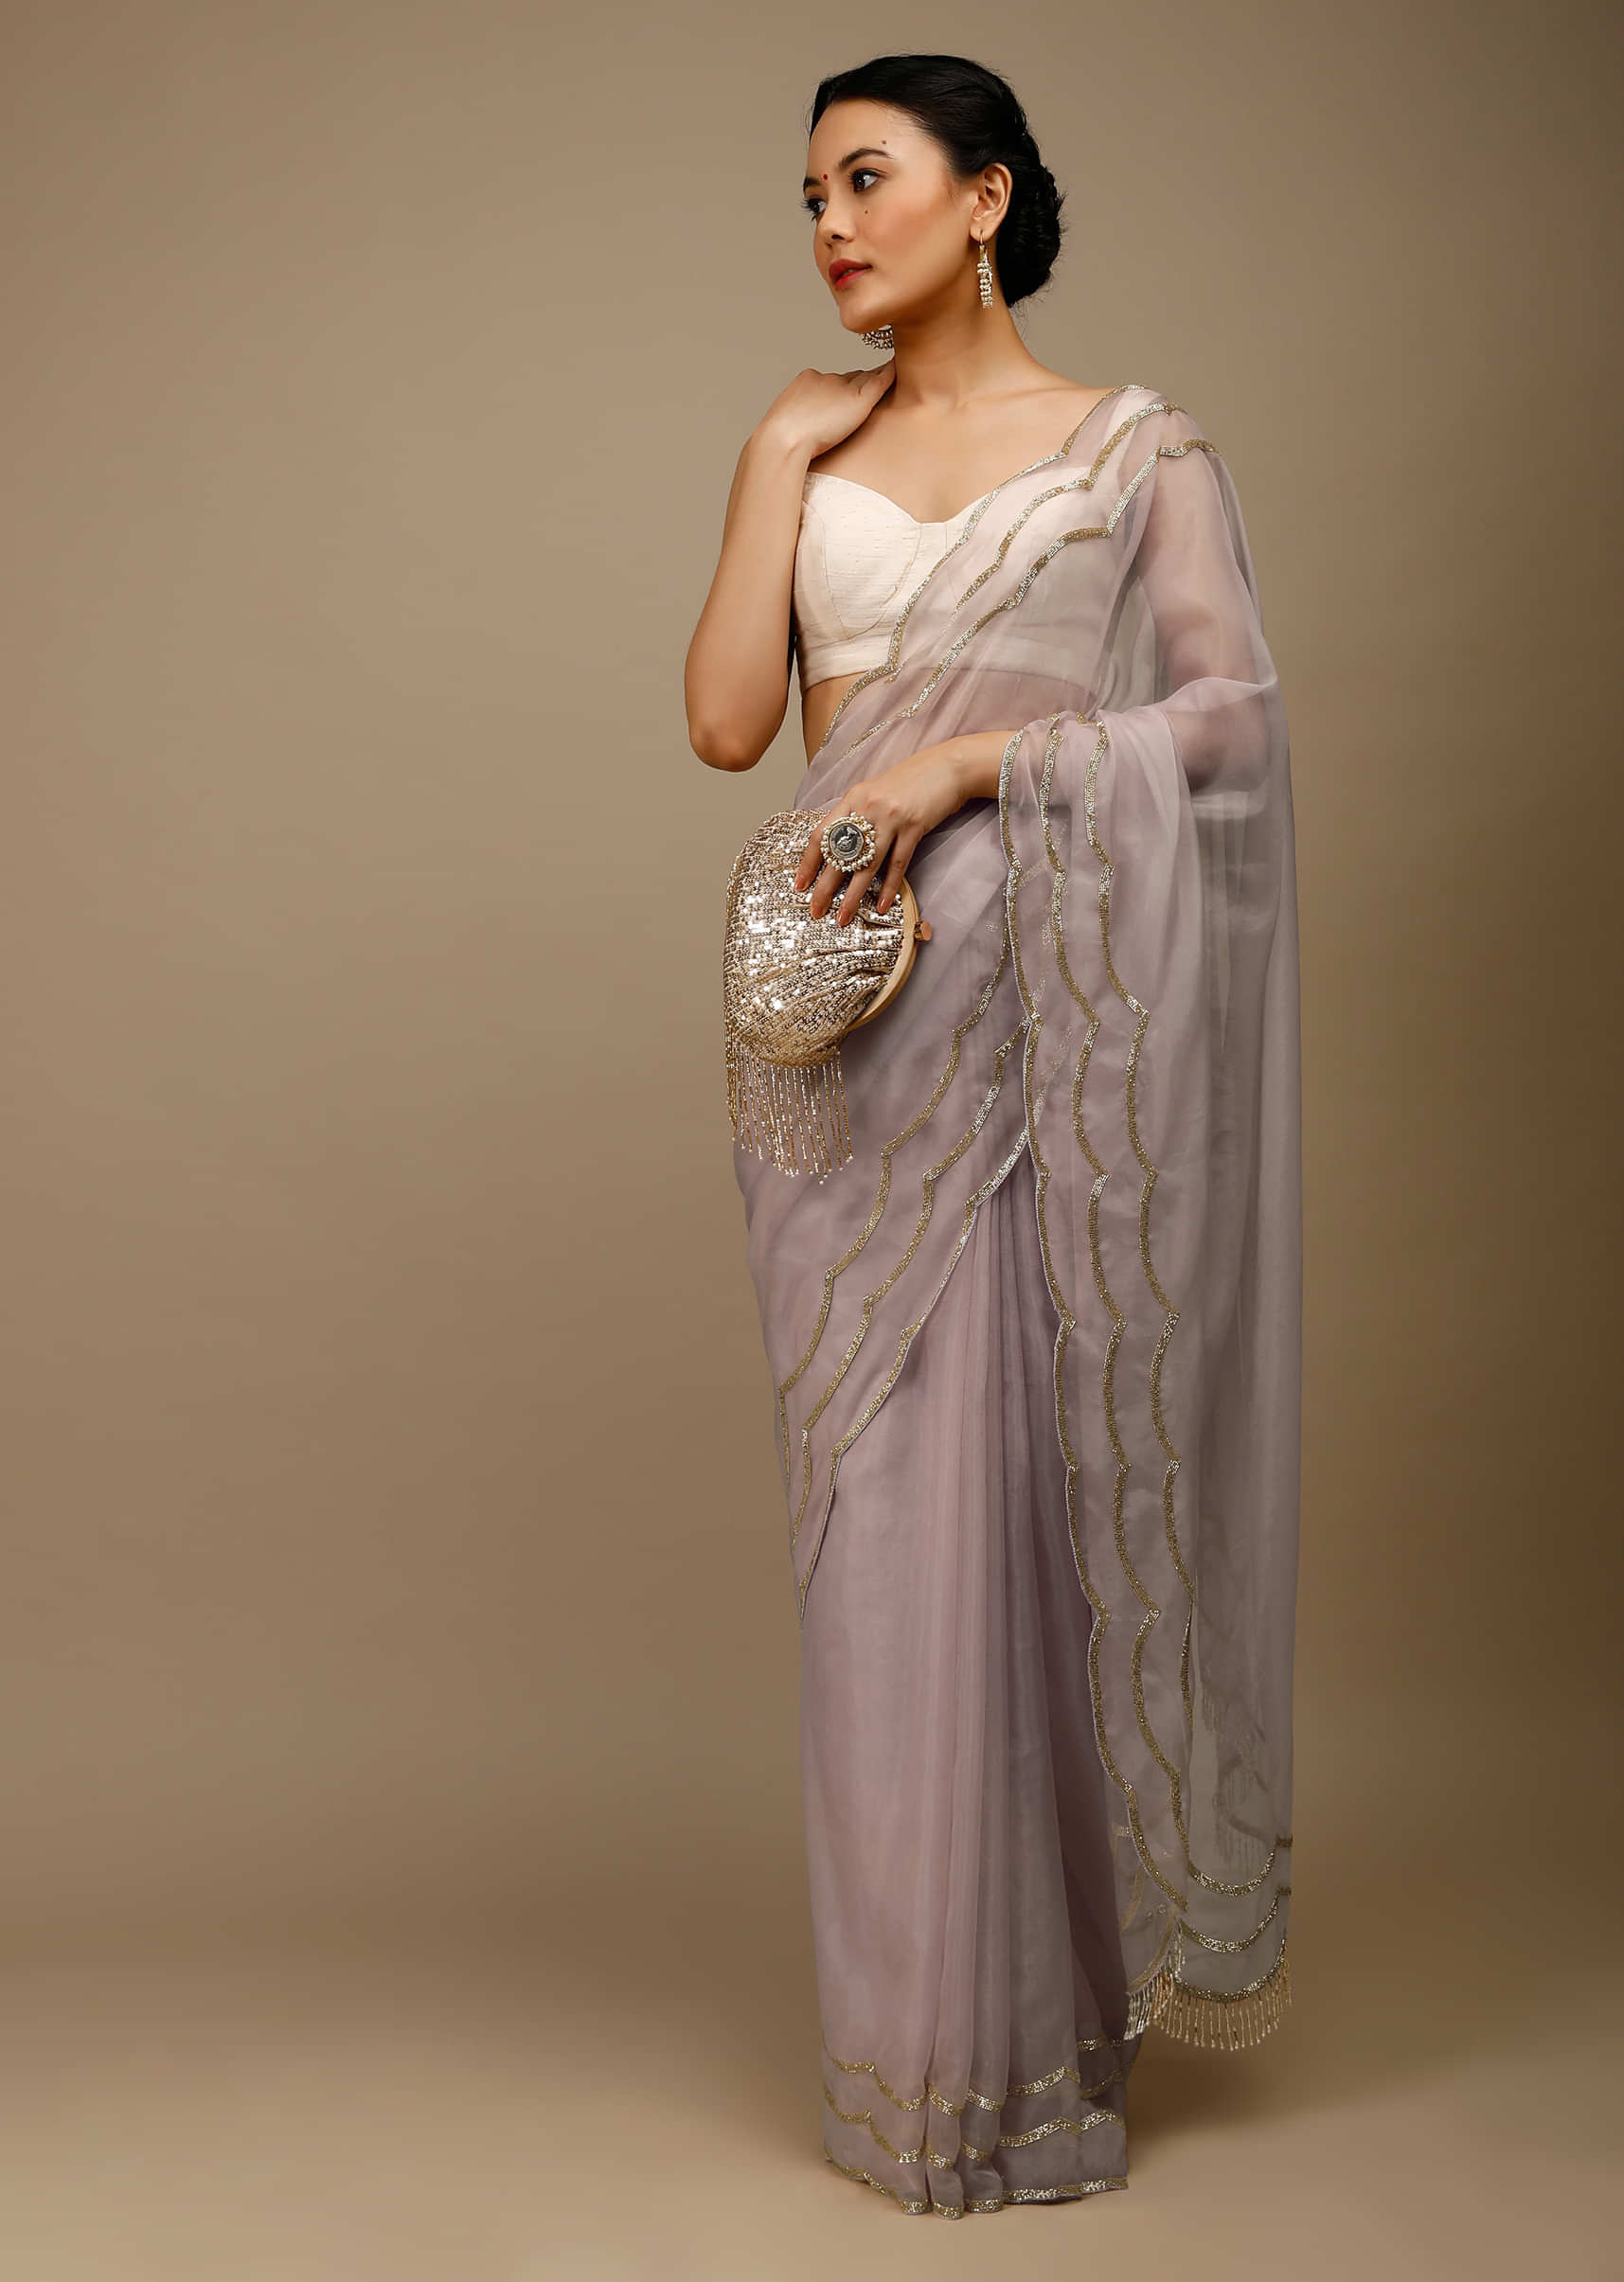 Lilac Ash Saree In Organza With Cut Dana Embroidered Scallop Cut Border And Moti Fringes On The Pallu  